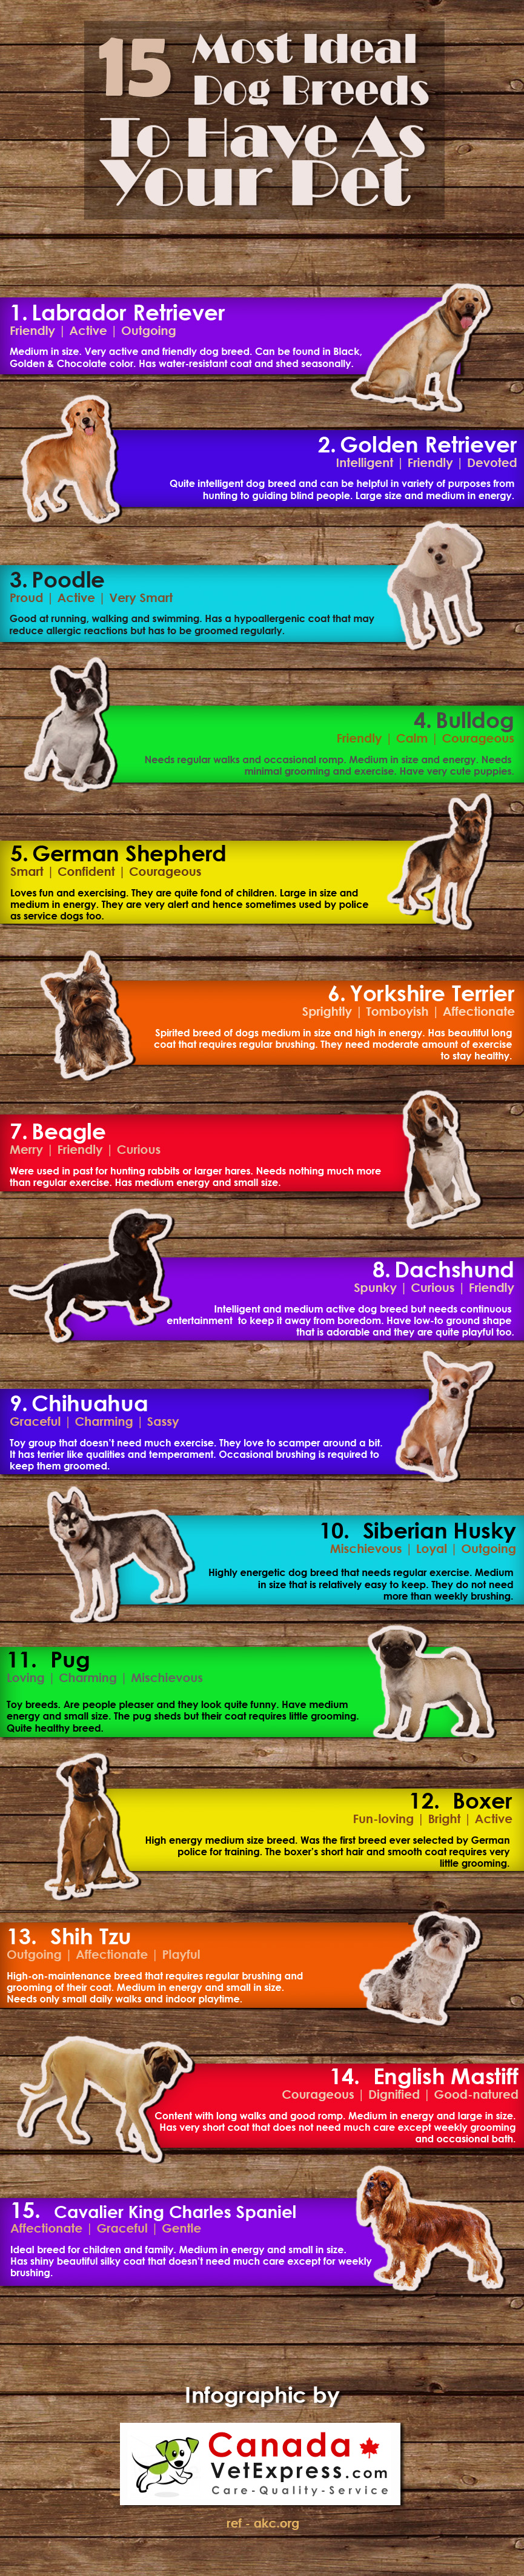 15 Great Dog Breeds to Have as a Pet Infographic